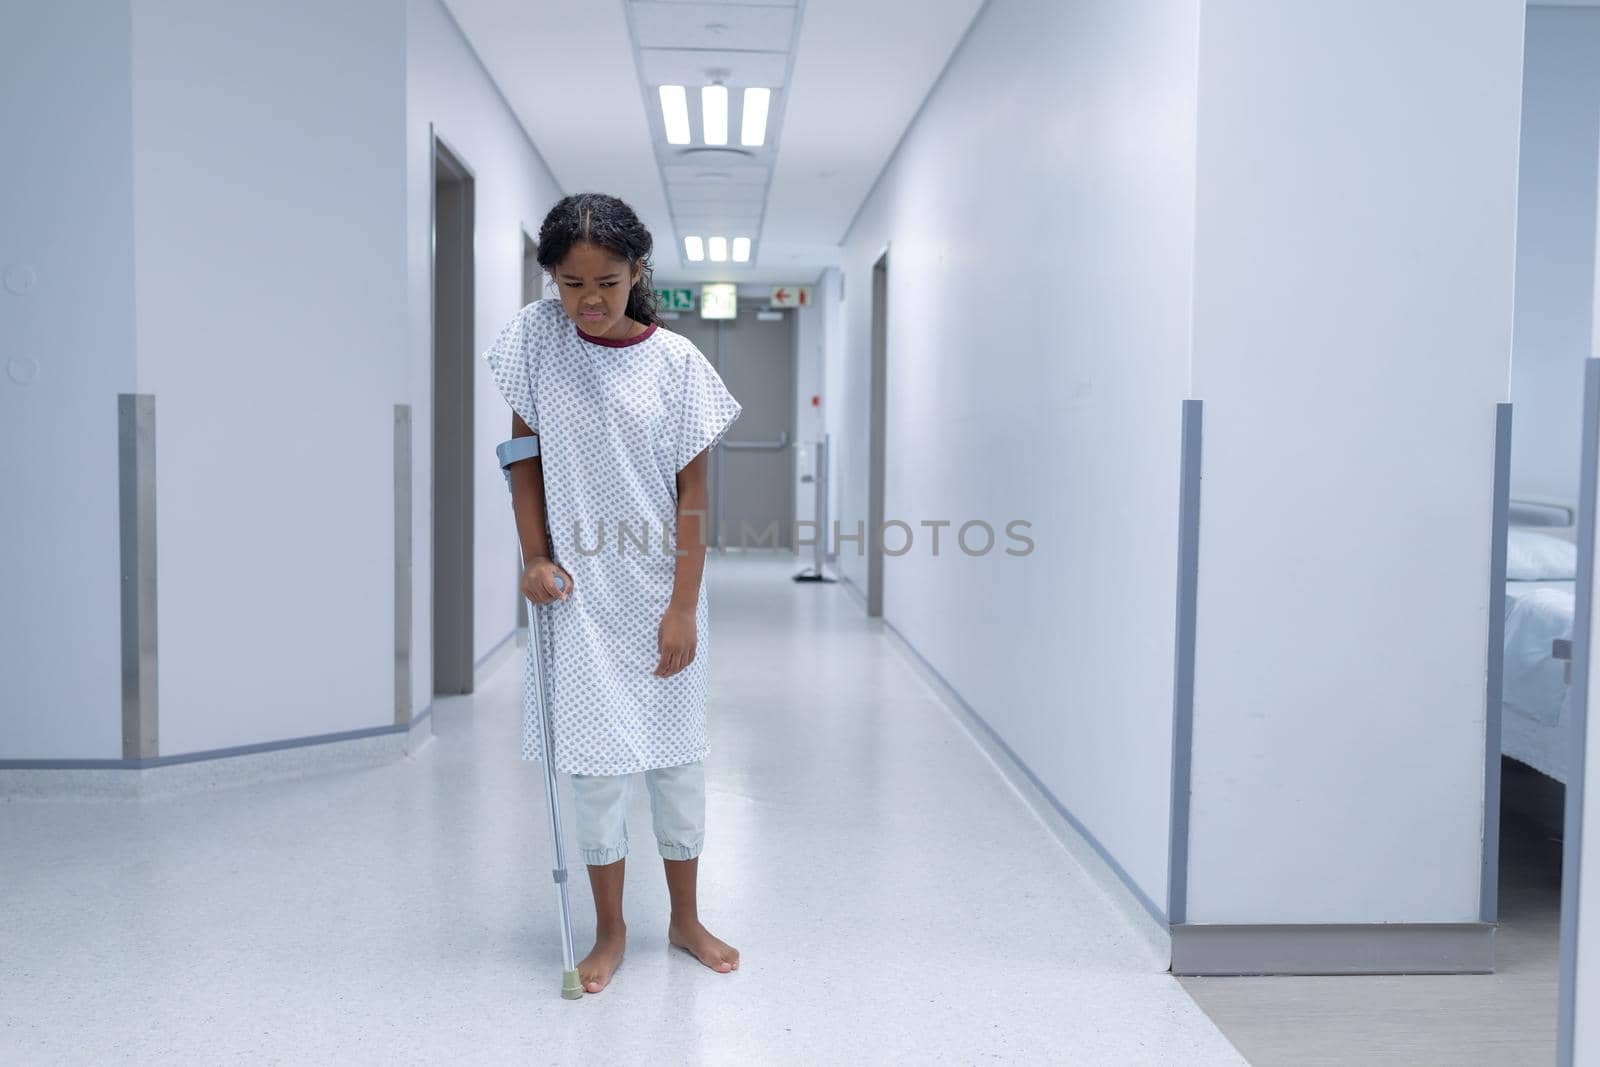 Sick mixed race girl walking barefoot in hospital corridor using a crutch. medicine, health and healthcare services.